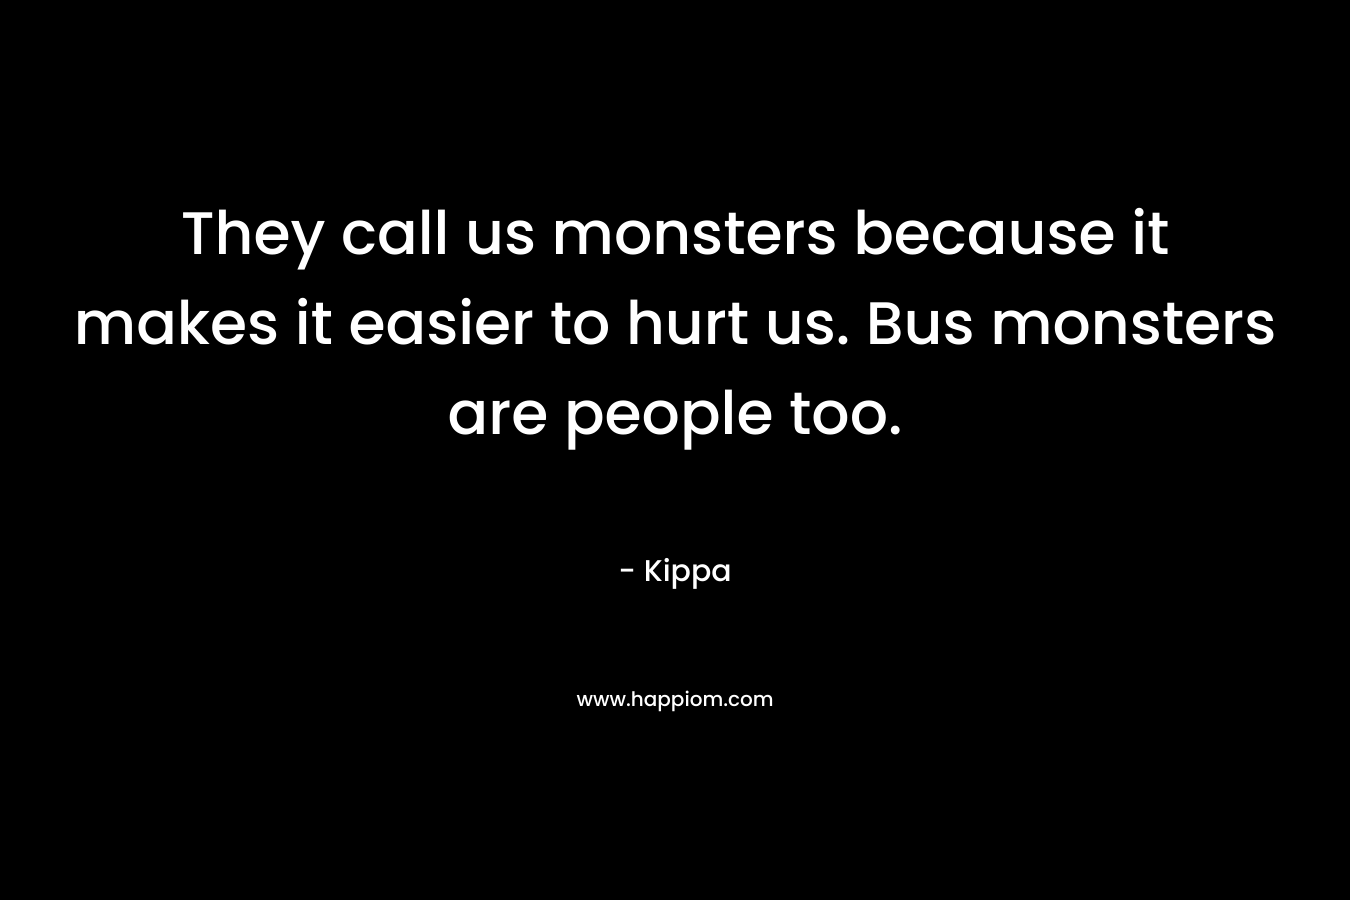 They call us monsters because it makes it easier to hurt us. Bus monsters are people too.